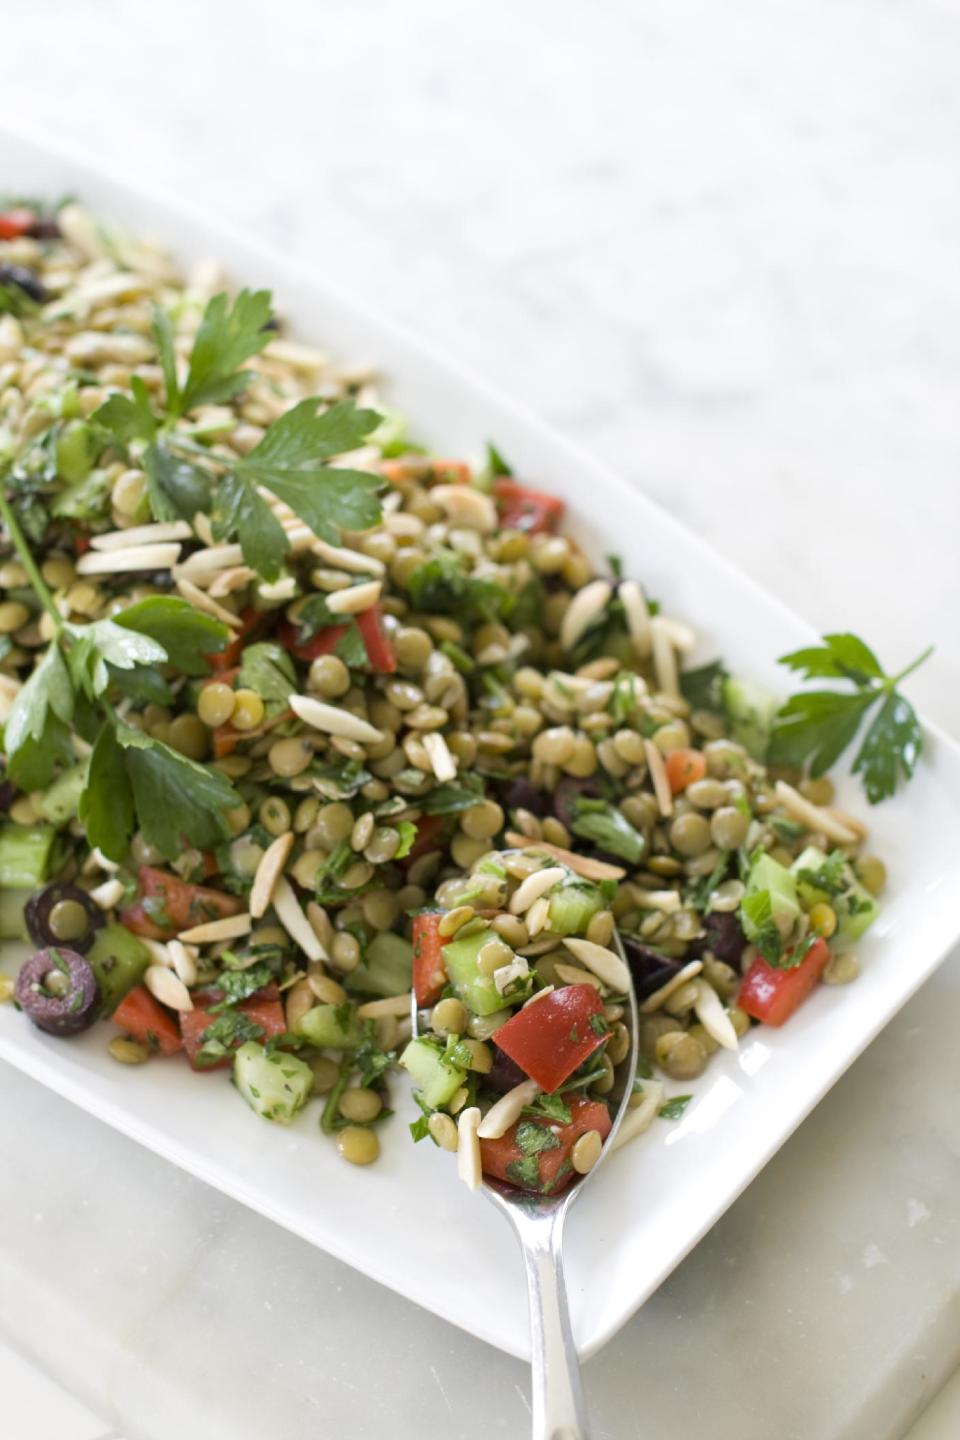 This July 29, 2013 photo shows lentil tabbouleh in Concord, N.H. (AP Photo/Matthew Mead)